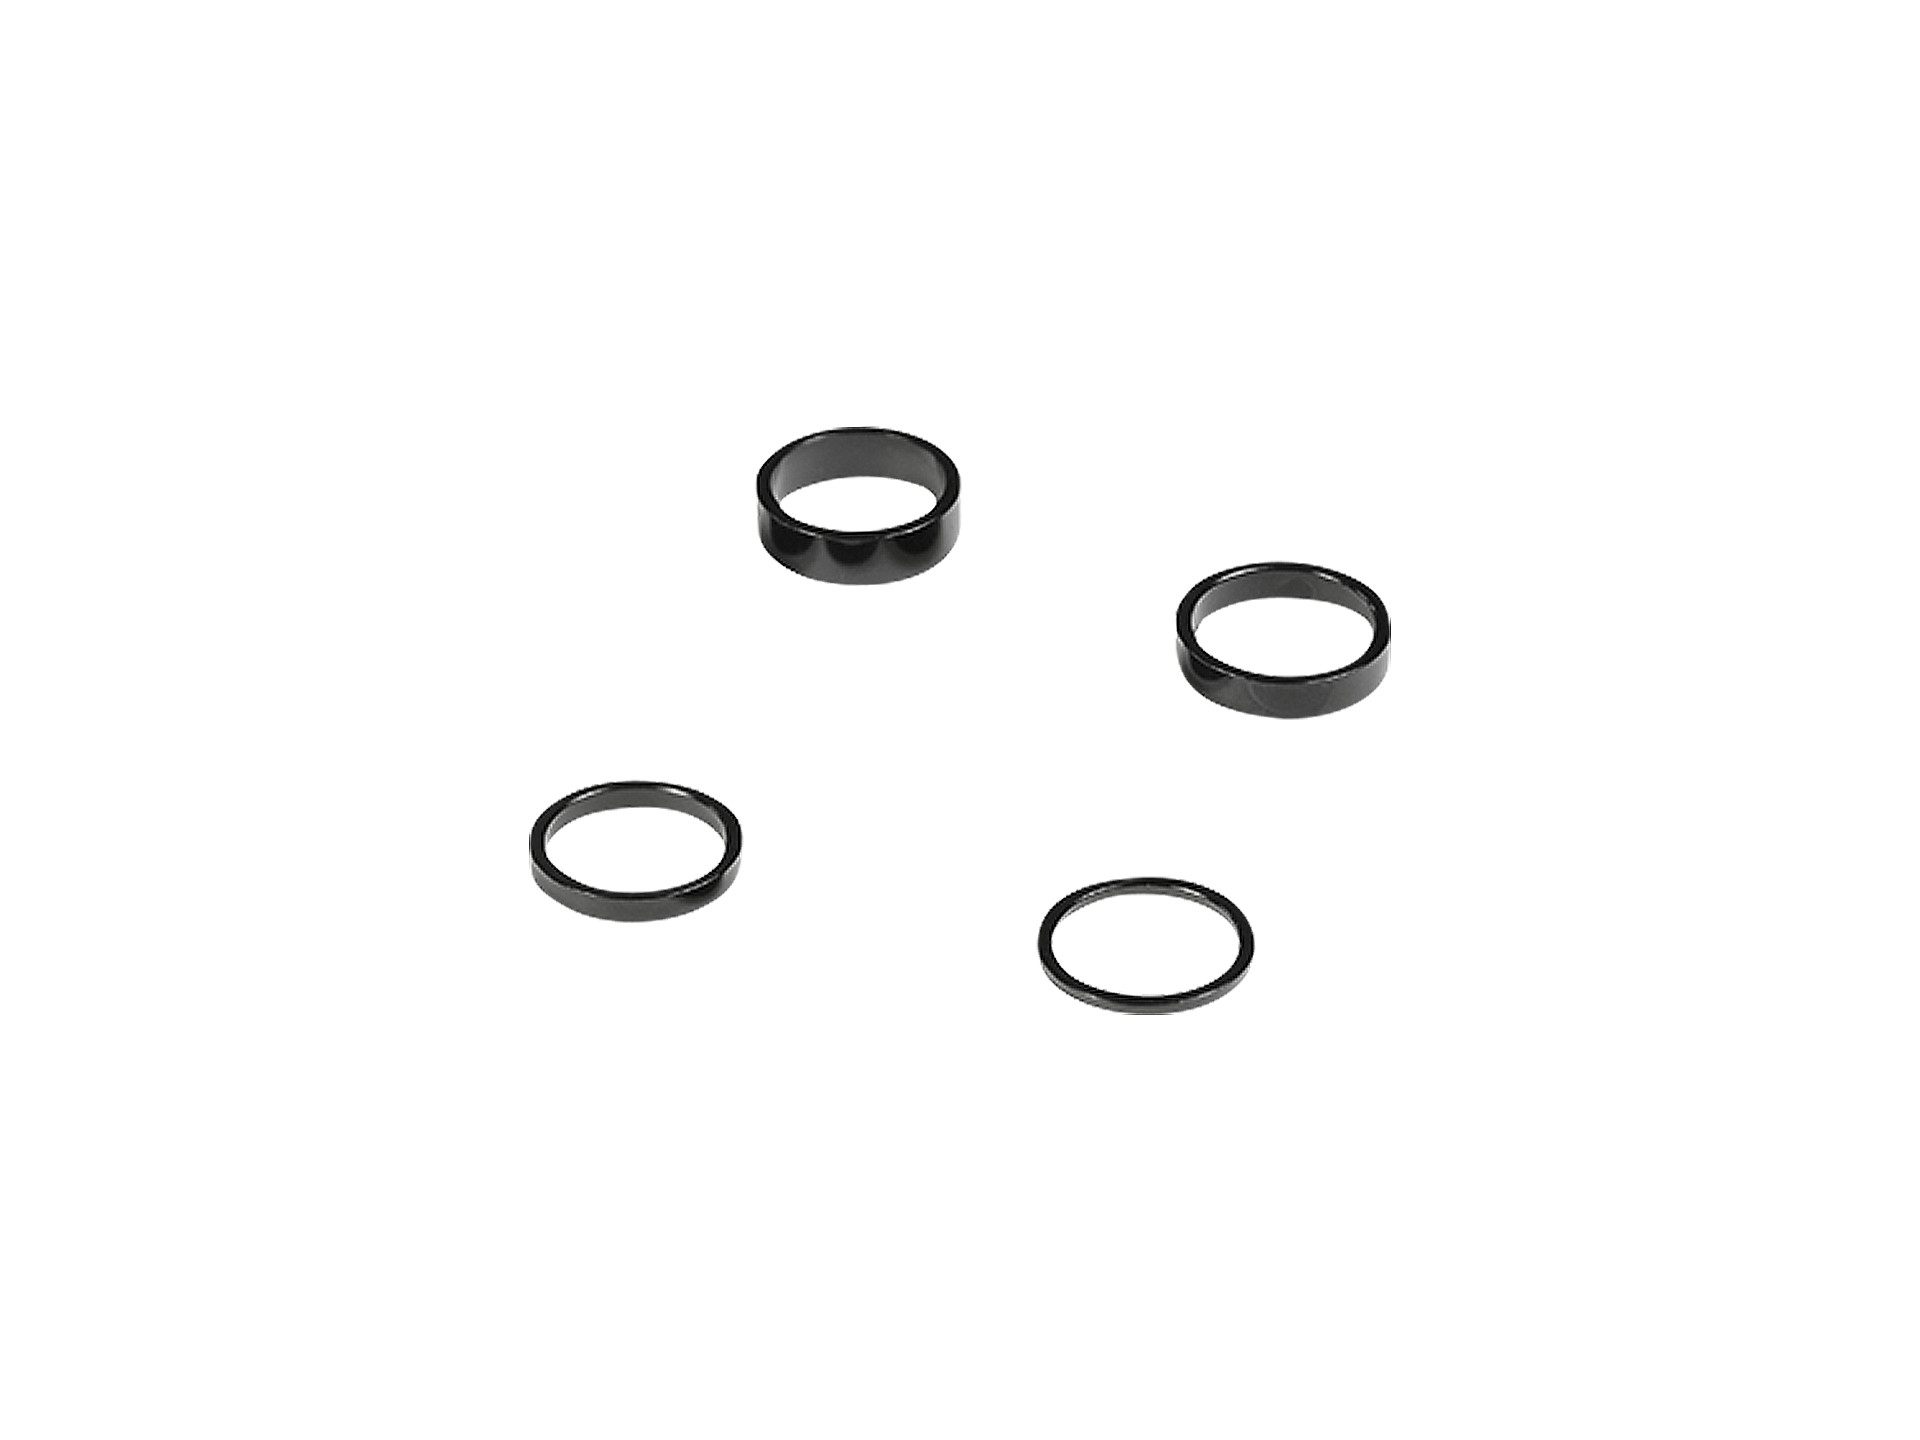 Matte 2.5mm Wheels Manufacturing Carbon Headset Spacer 1-1/8" 5-pack